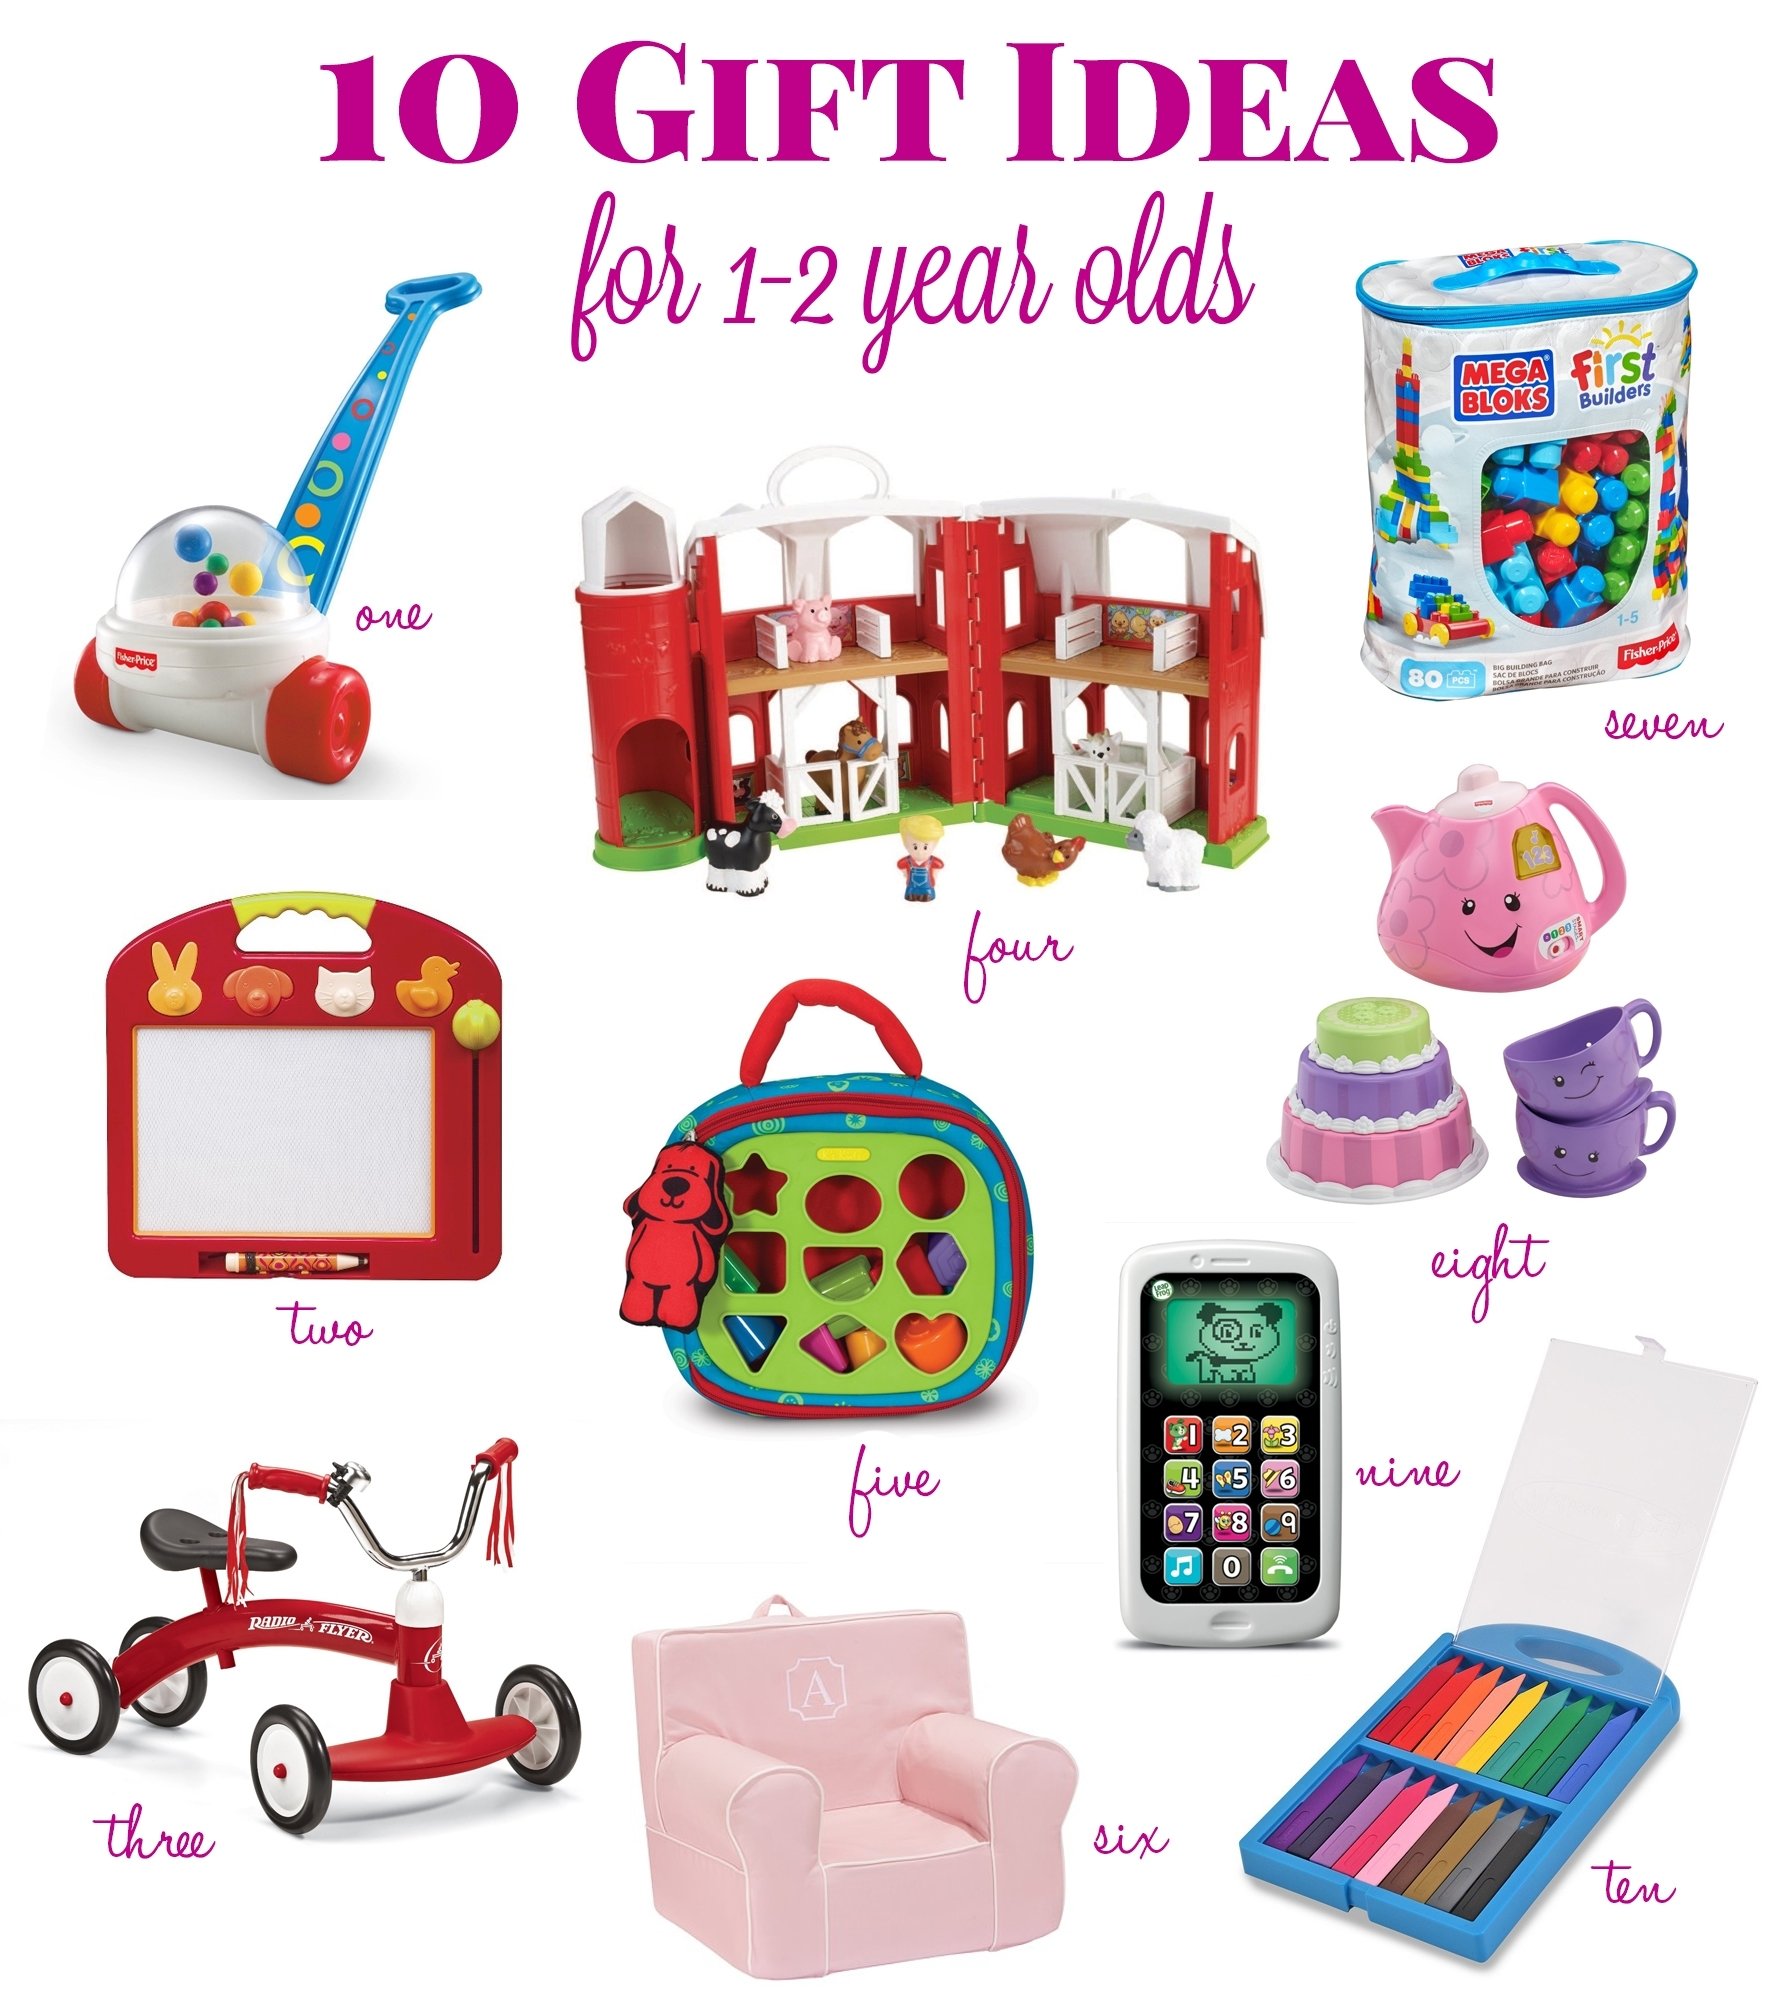 10 Most Popular Gift Ideas For 1 Year Old gift ideas for a 1 year old lifes tidbits 13 2022